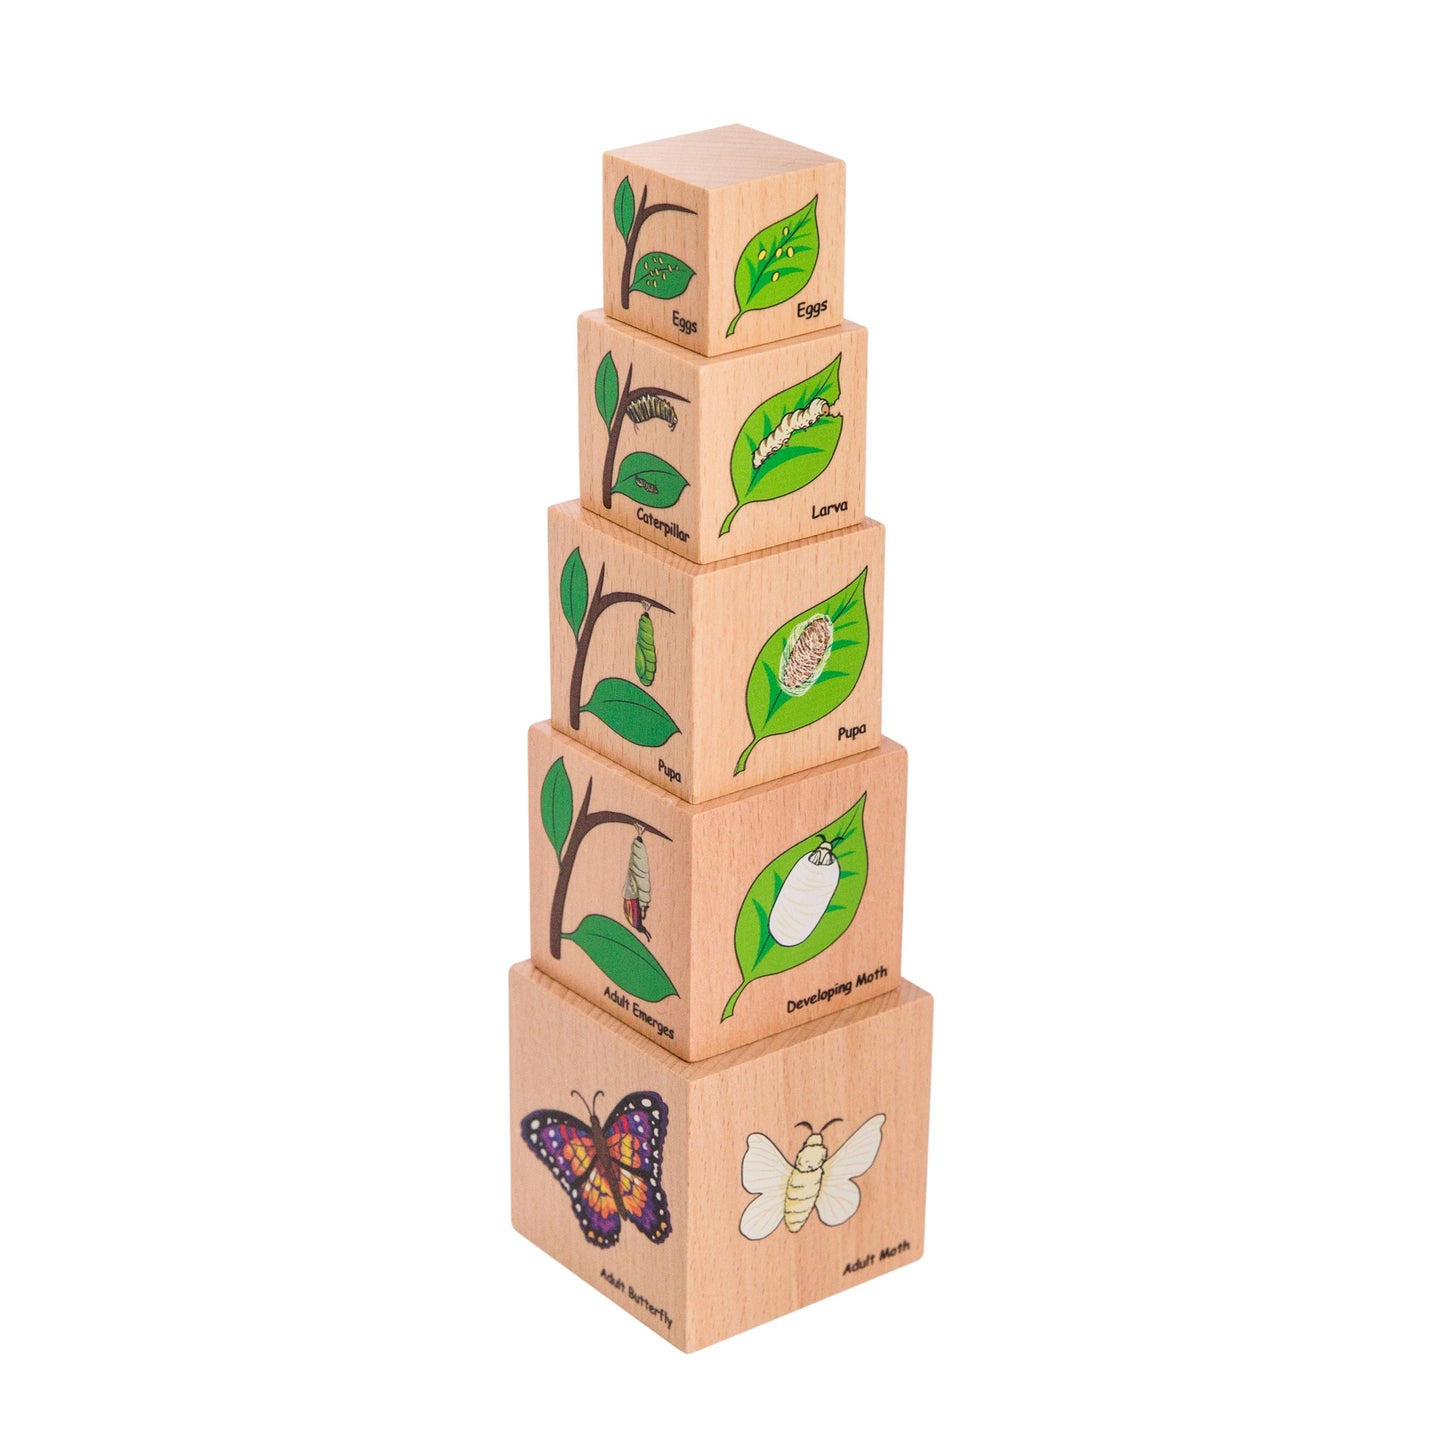 A great set for teaching the lifecycle of a moth, butterfly, chicken and frog. Contains 5 lifecycle blocks.